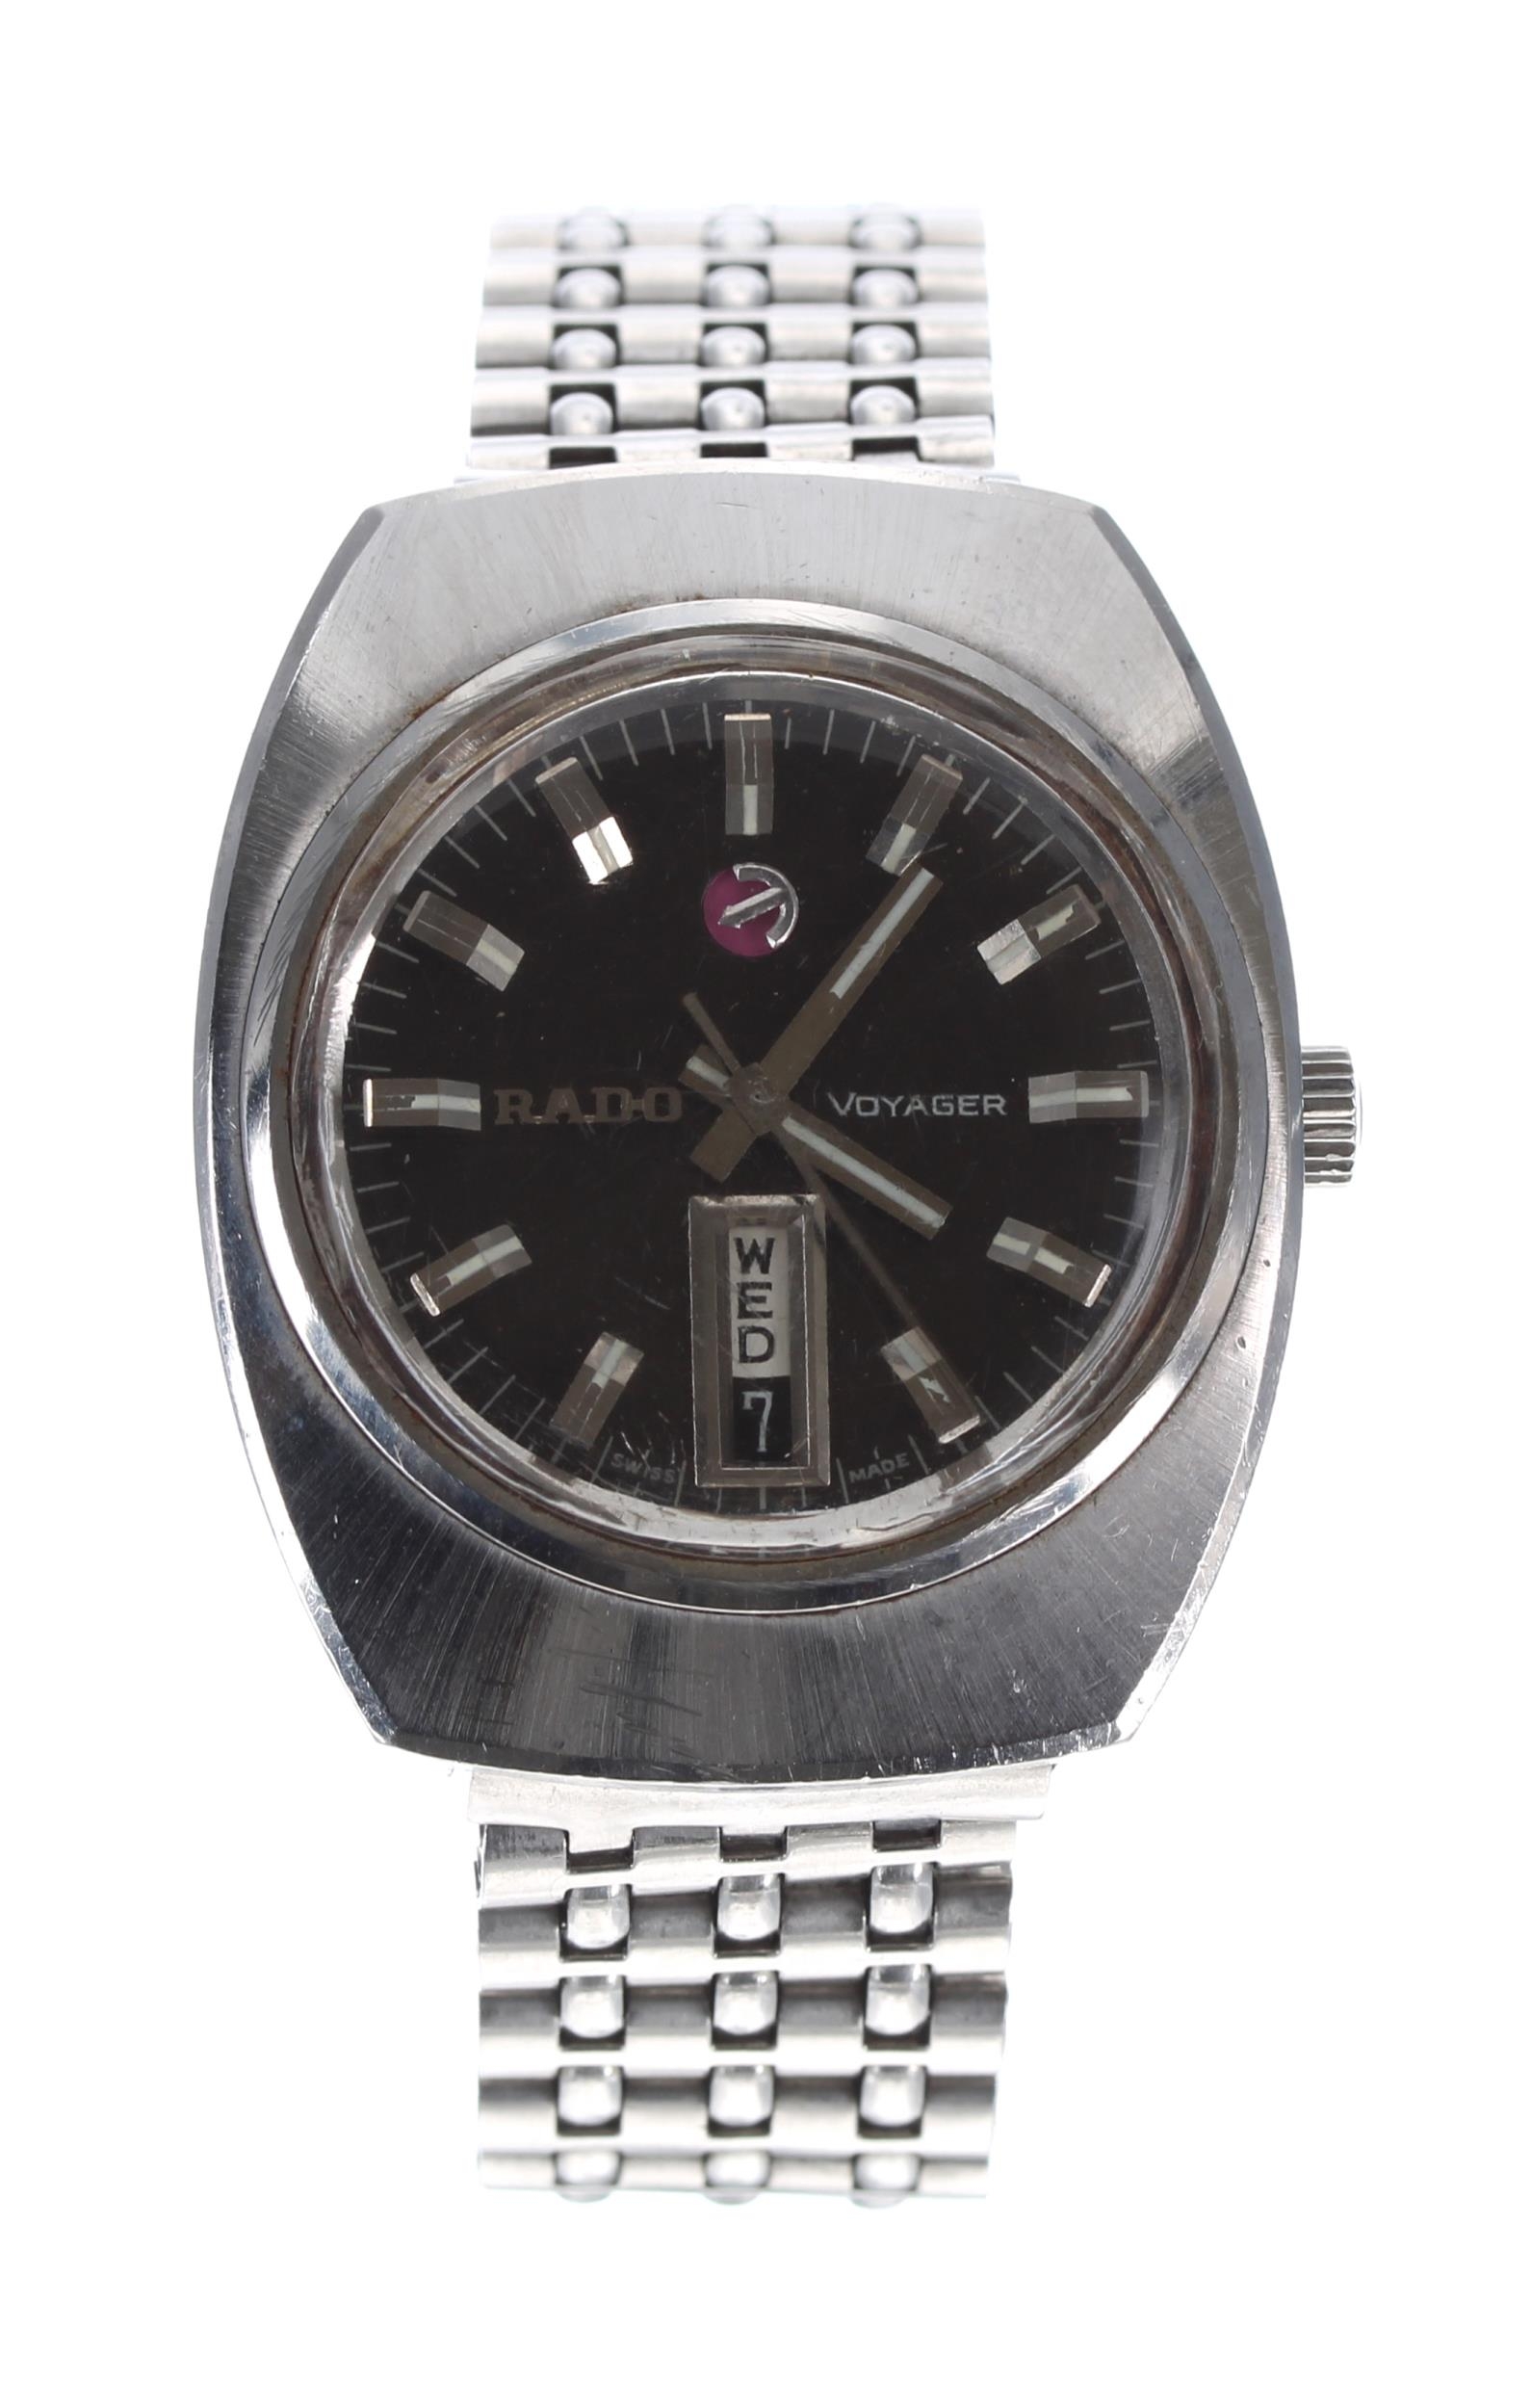 Rado Voyager automatic stainless steel gentleman's wristwatch, the grey dial with baton markers,